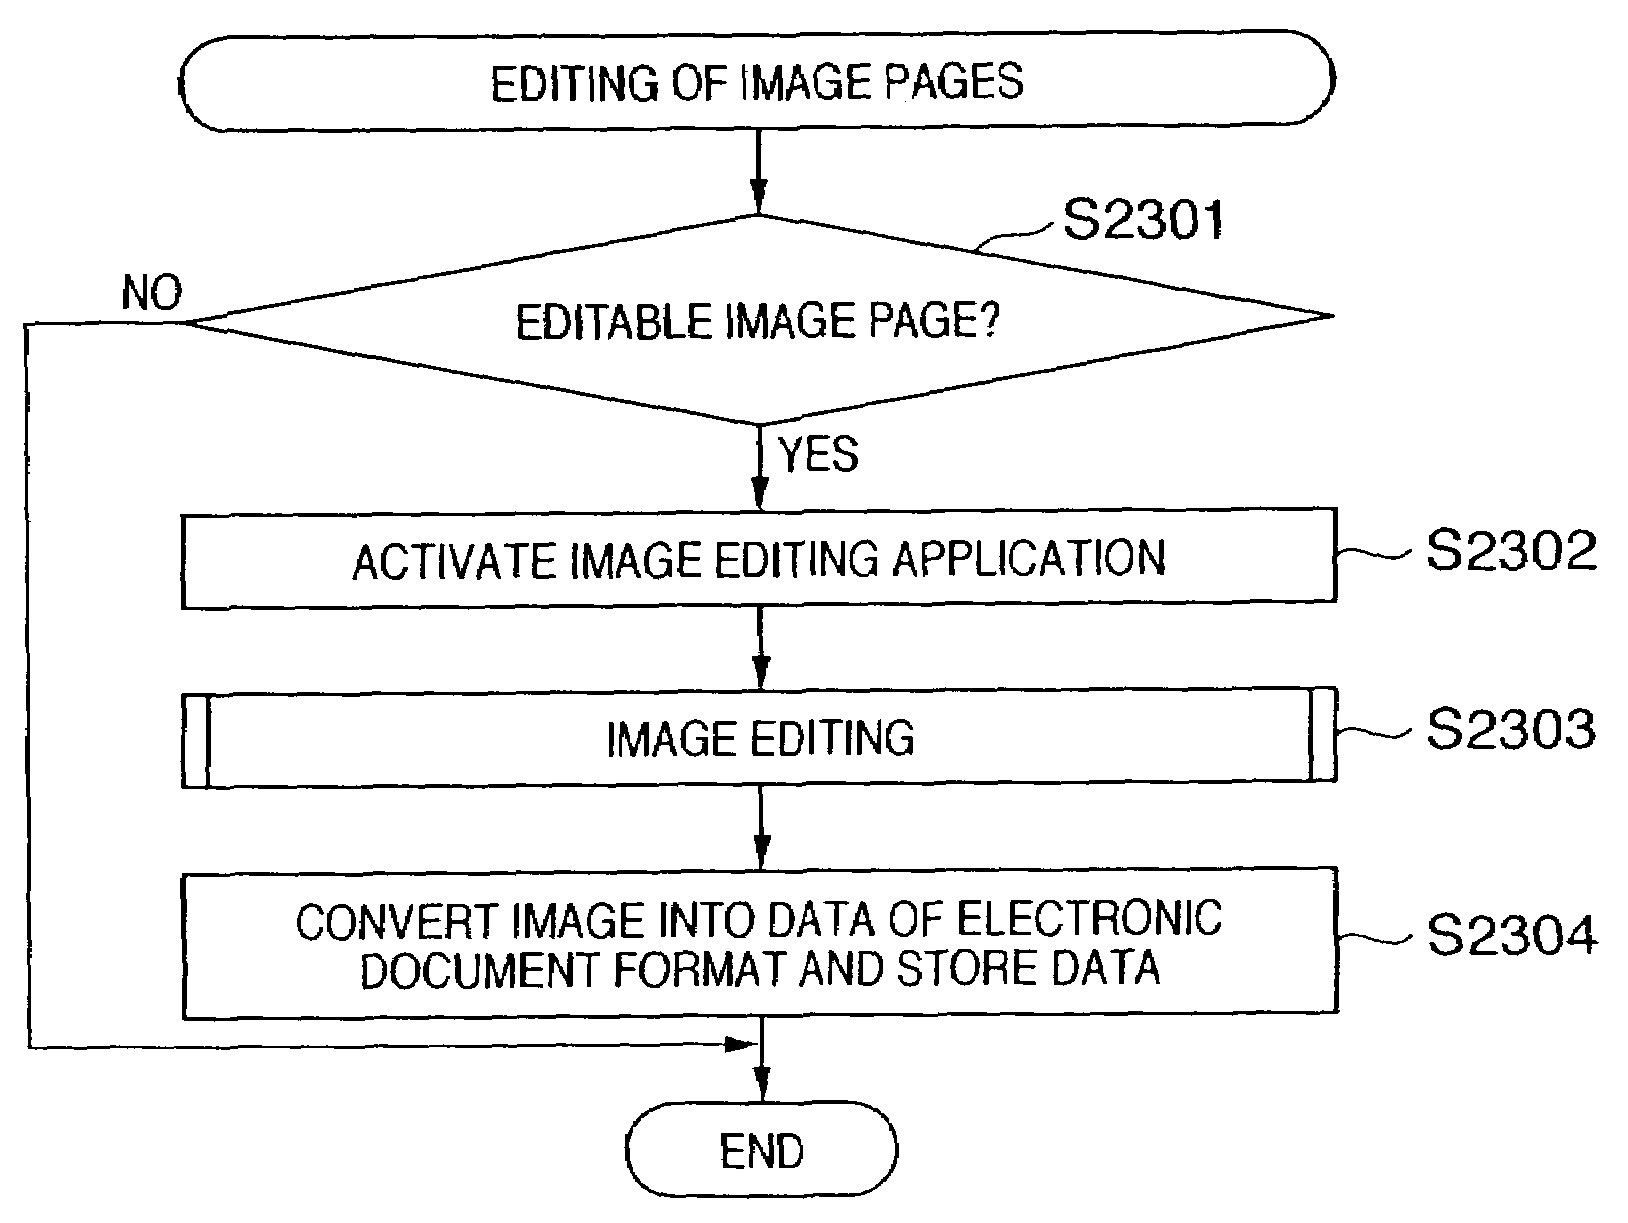 Image editing of documents with image and non-image pages